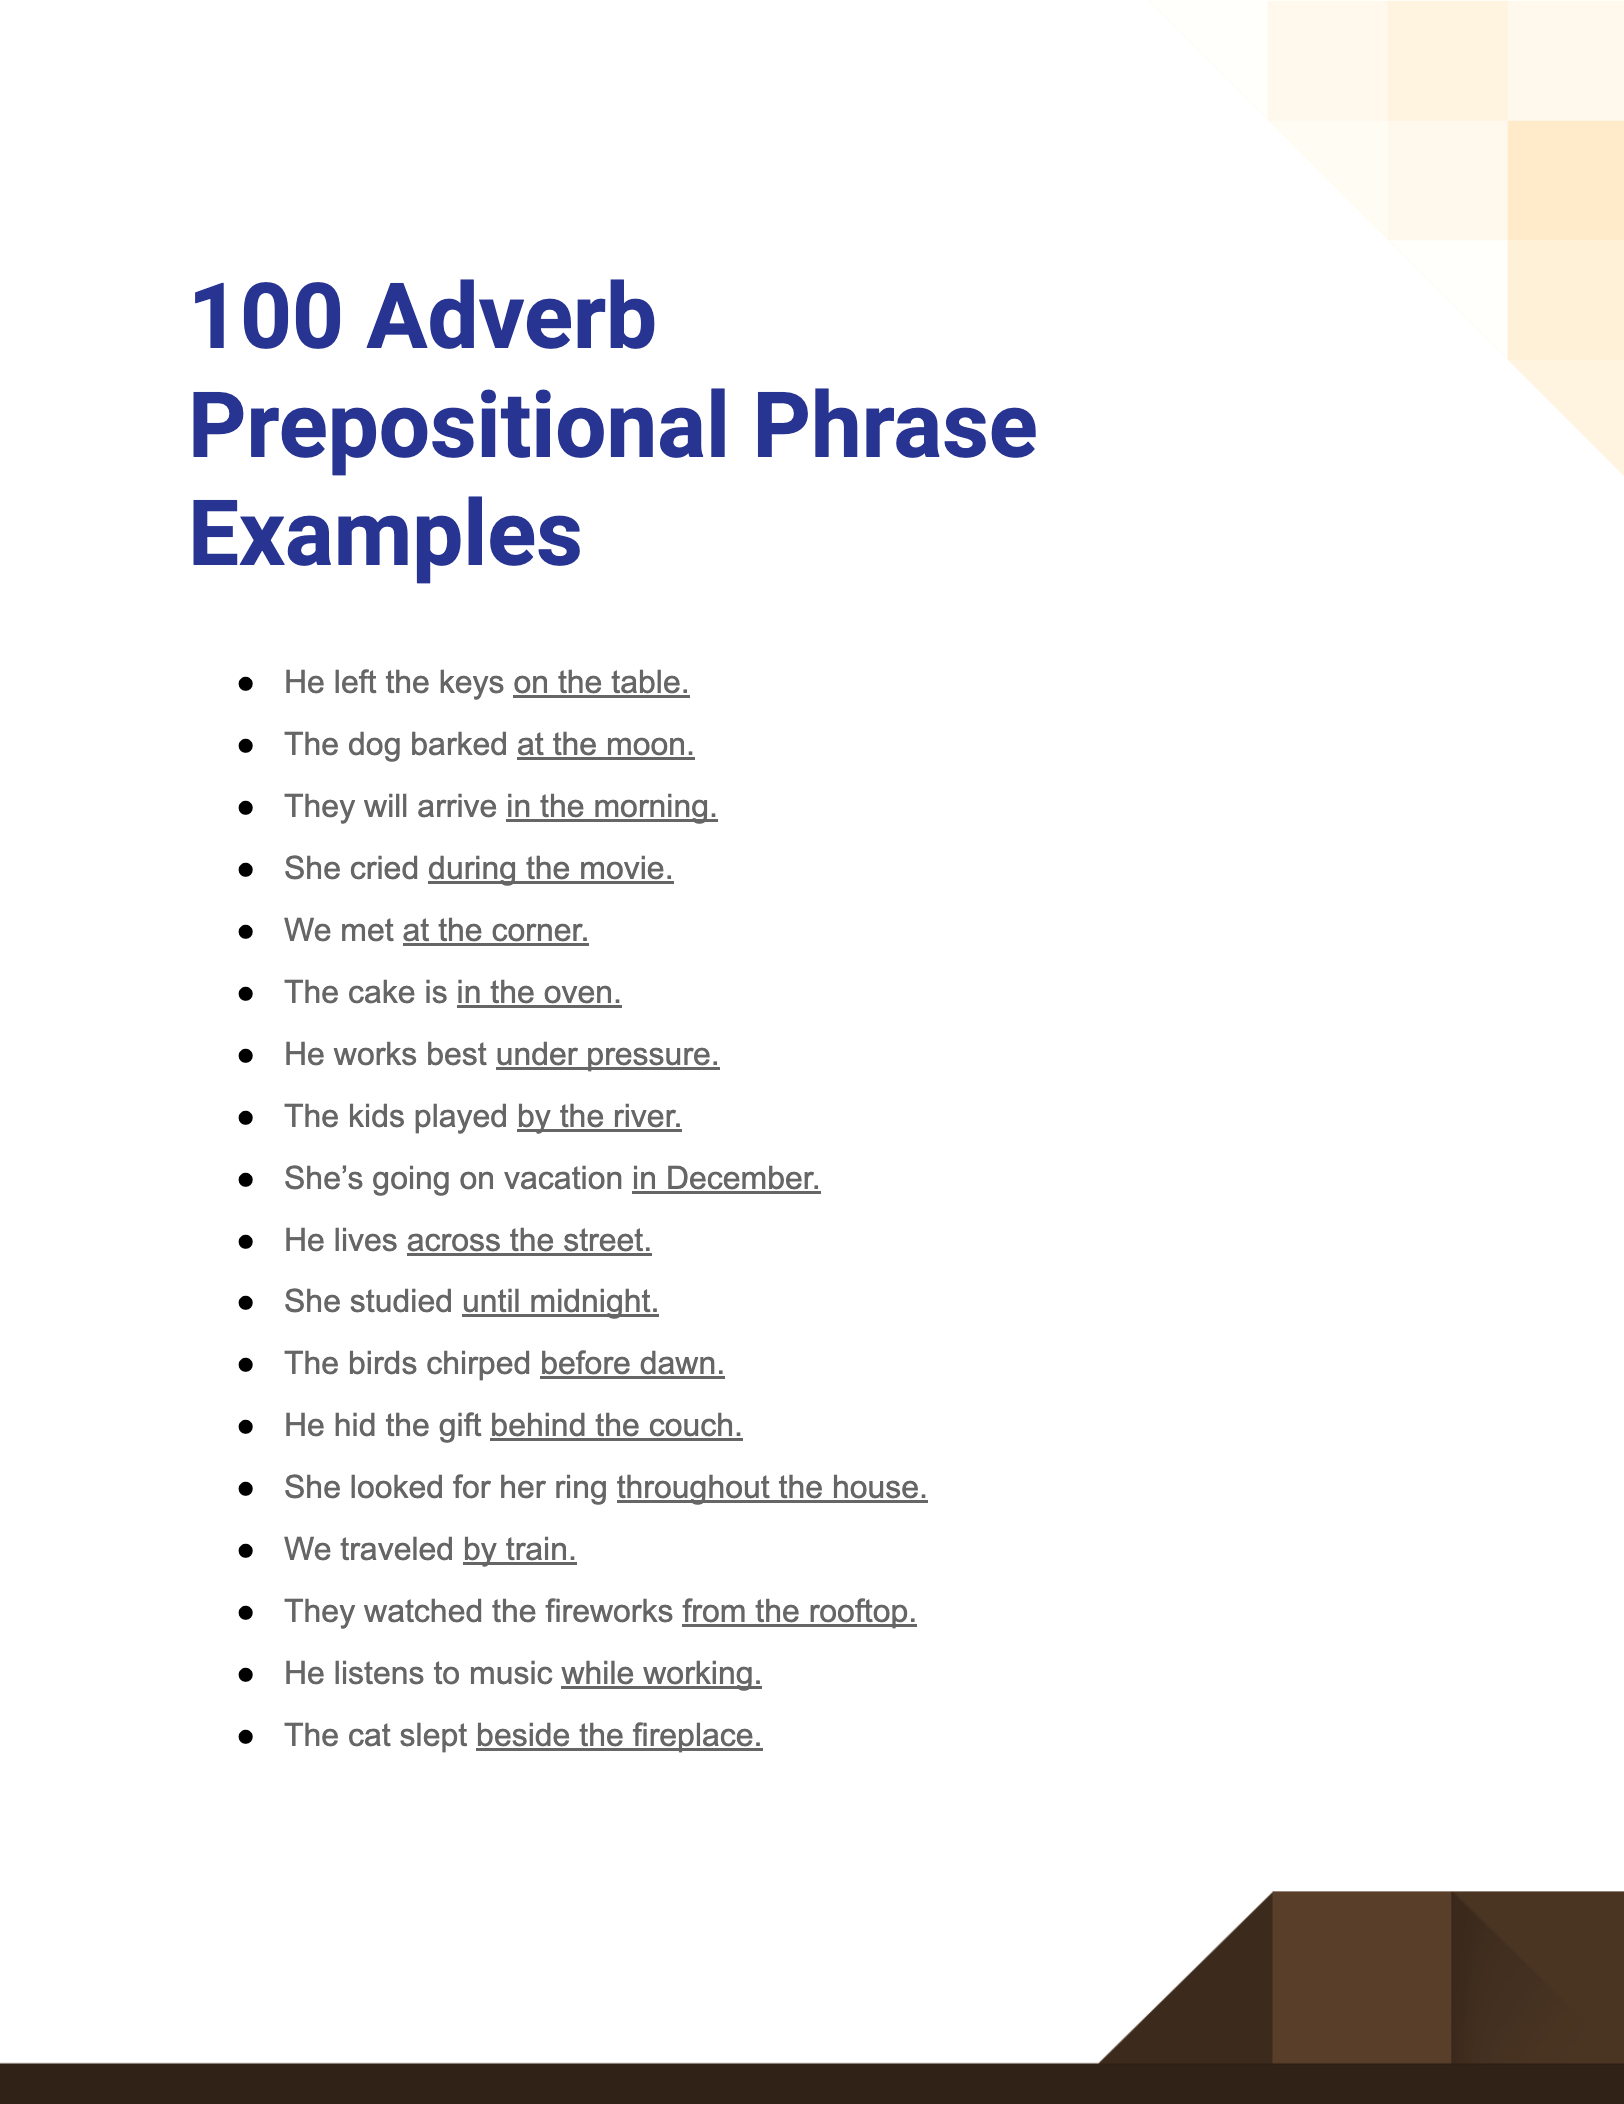 Adverb Prepositional Phrase 99 Examples How To Use Pdf Tips 3126